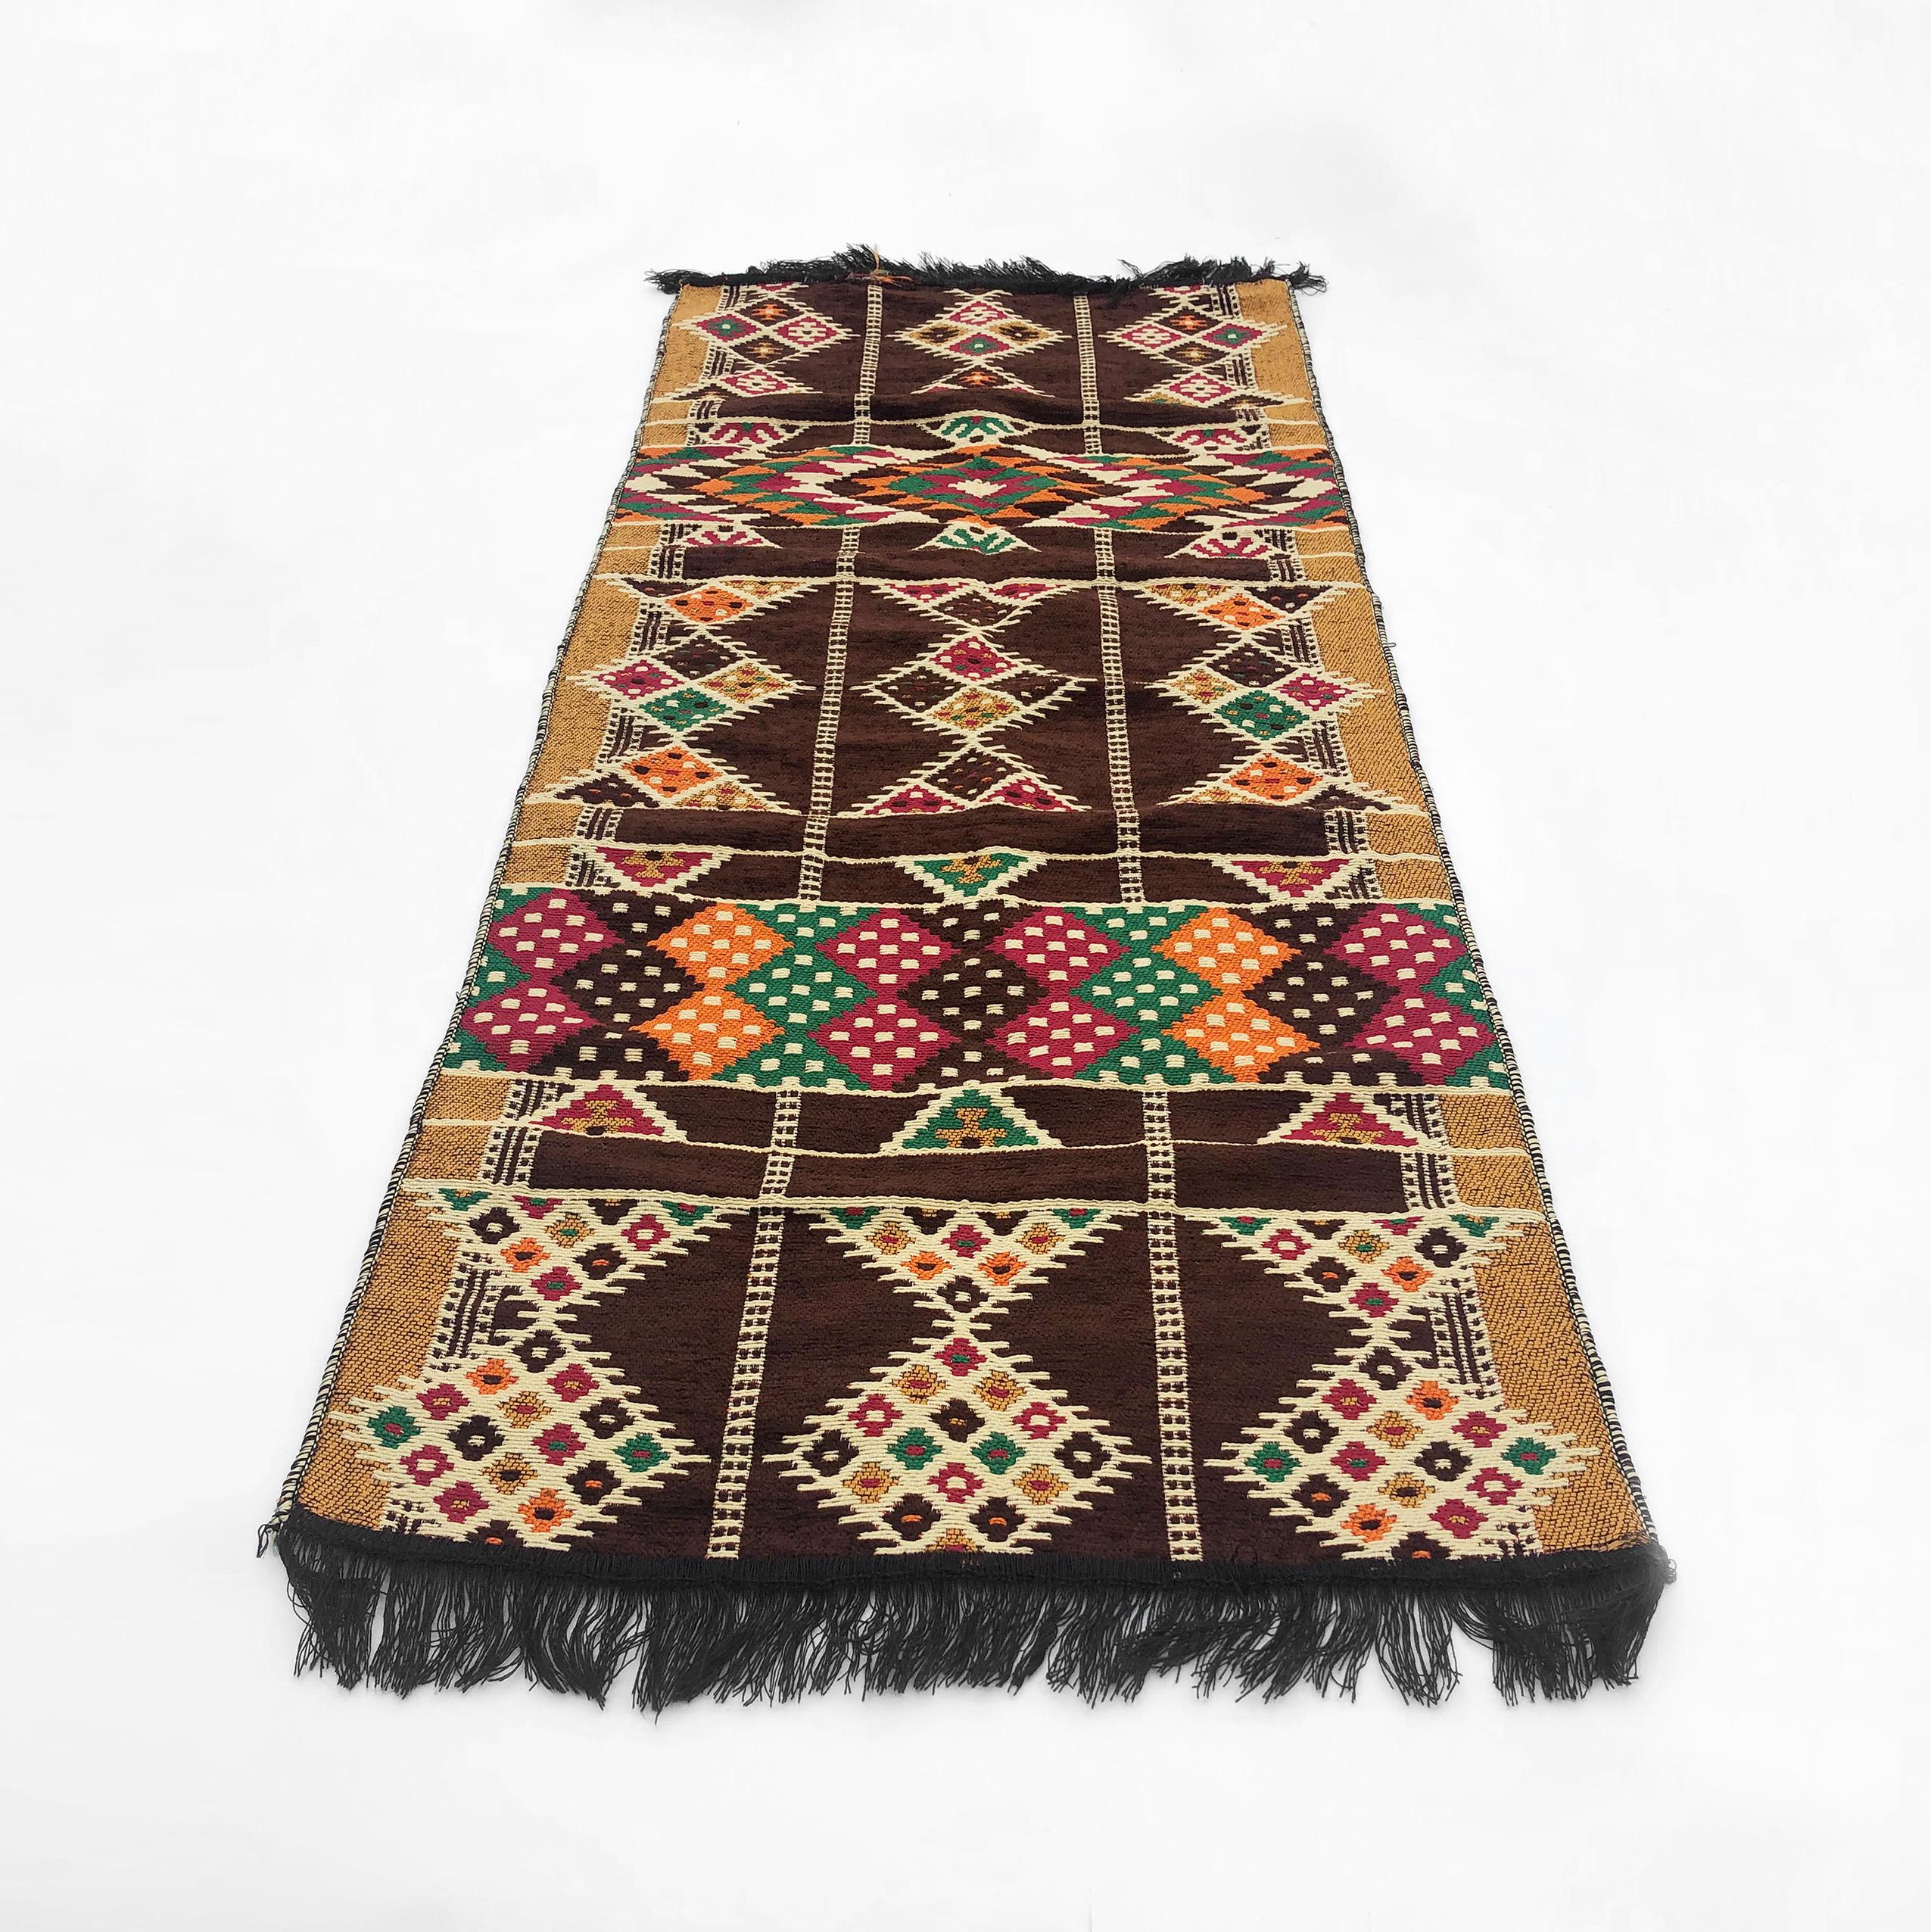 Egyptian Runner Rug Wall Hanging Vintage Bohemian Traditional North African In Good Condition For Sale In London, GB